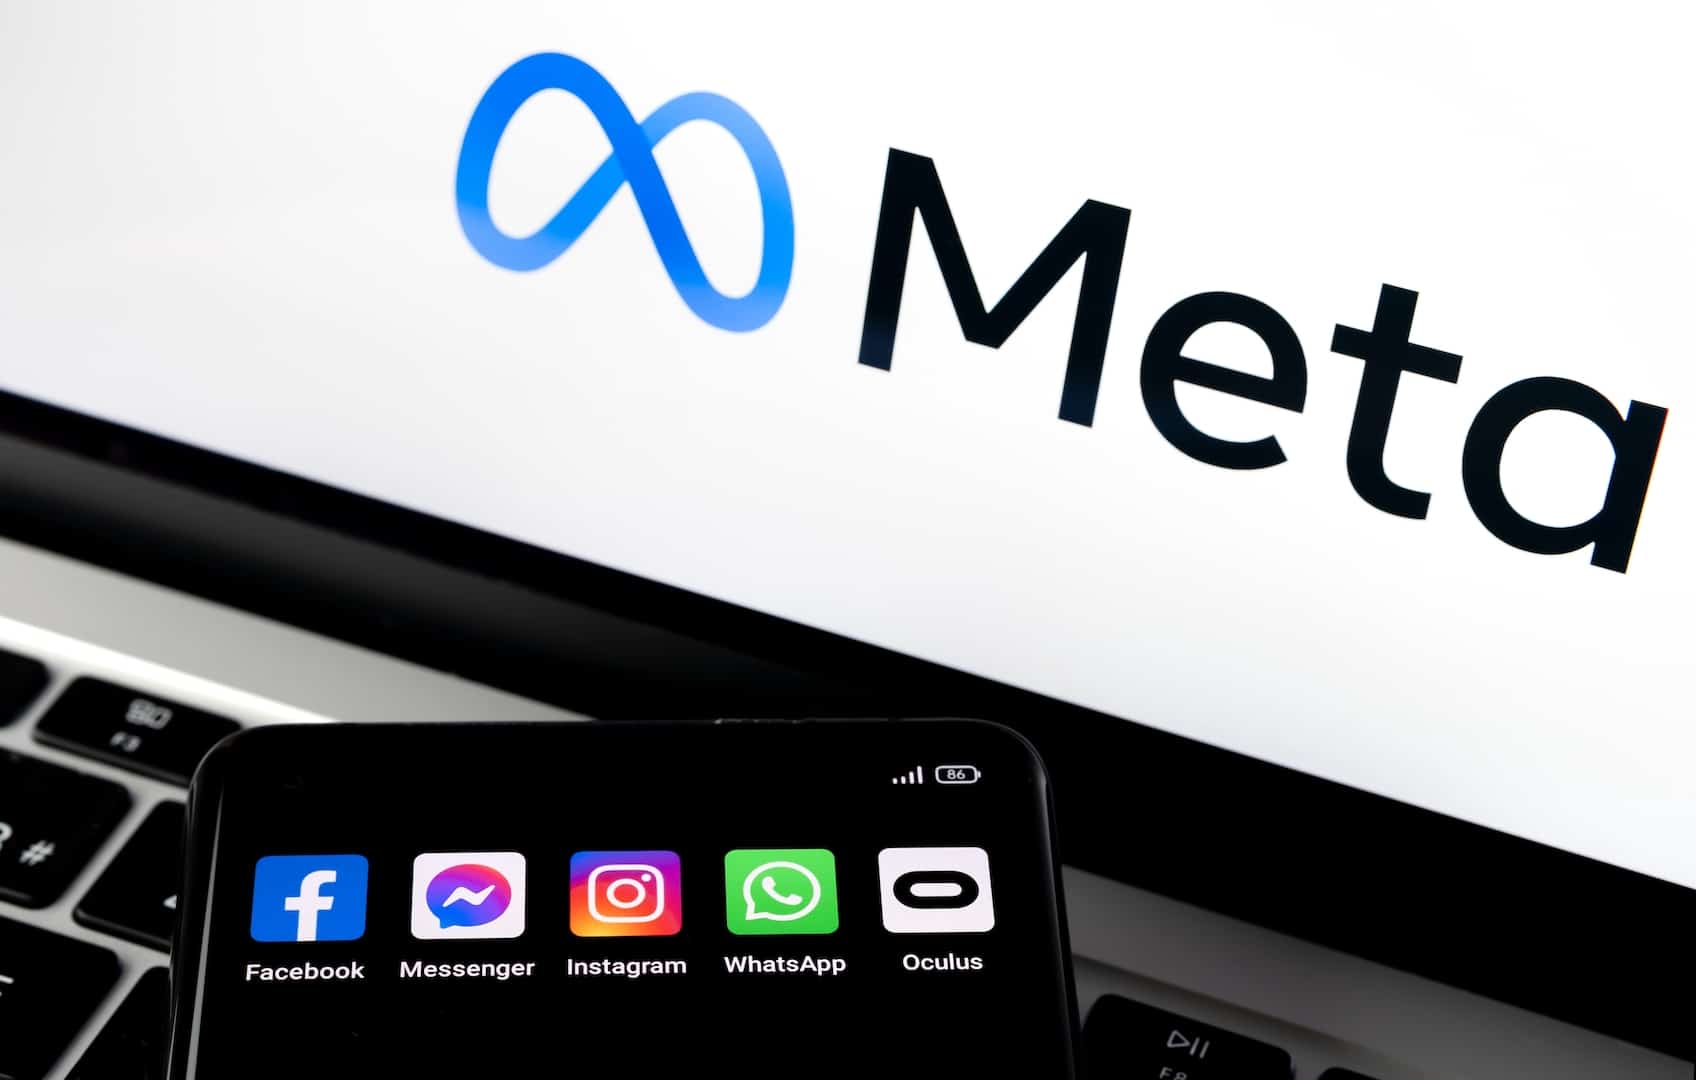 #Meta steps up data privacy measures in Europe amid targeted ad concerns